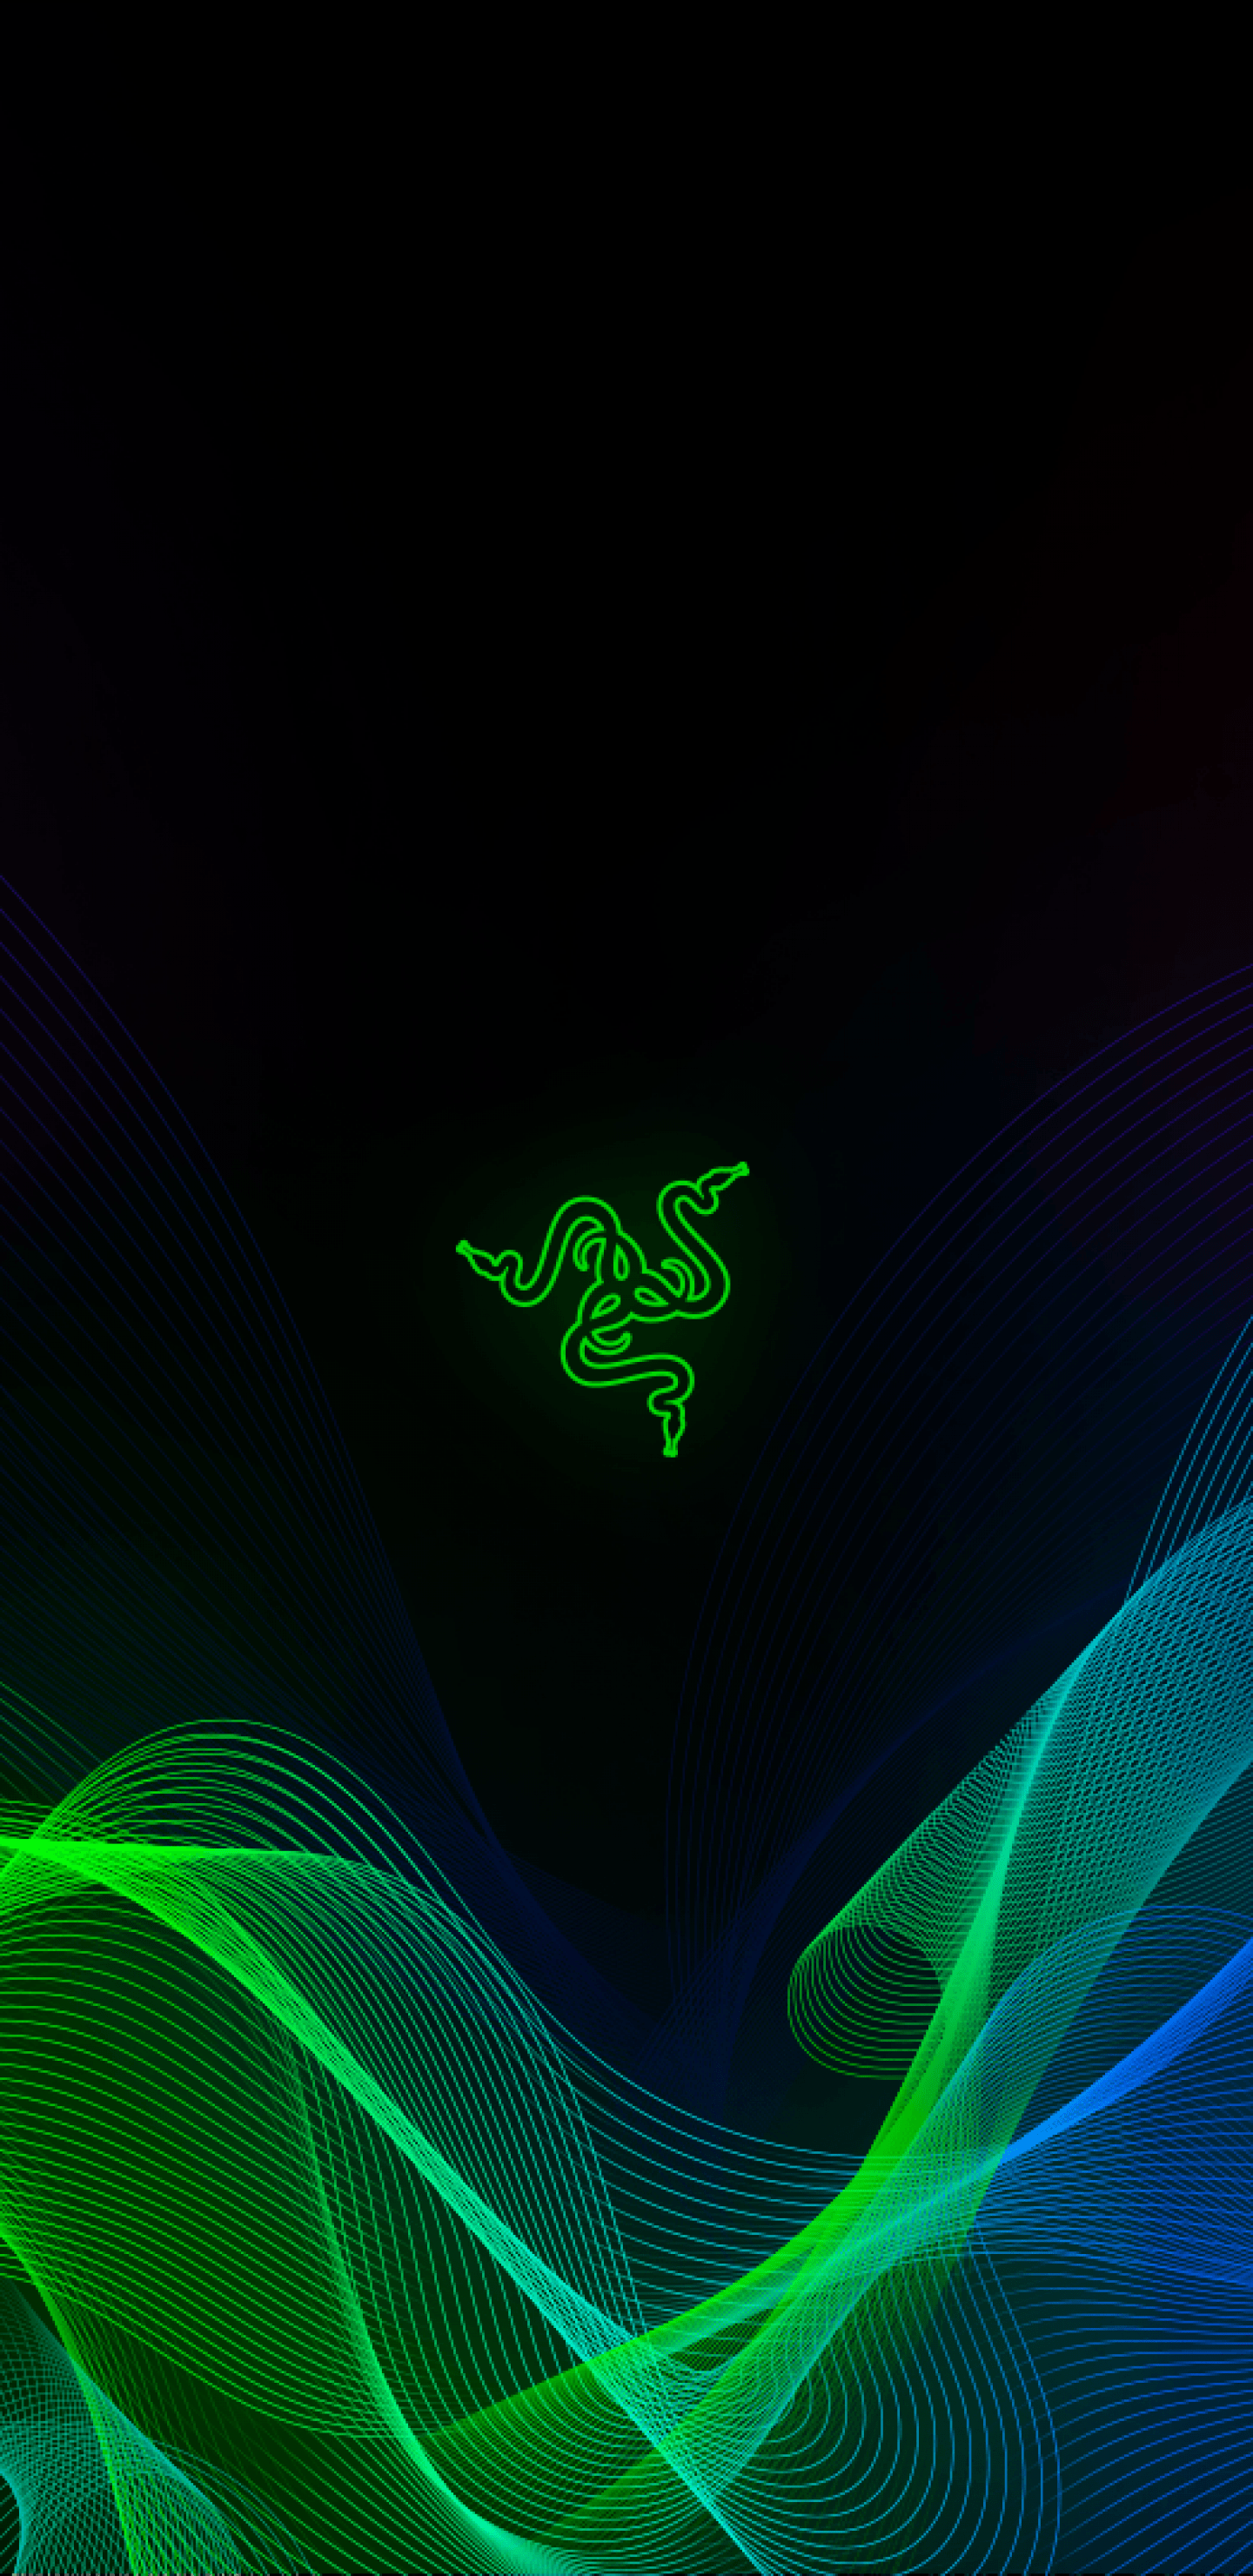 Download 1440x2960 Razer, Abstract, Waves, Sync Wallpapers for